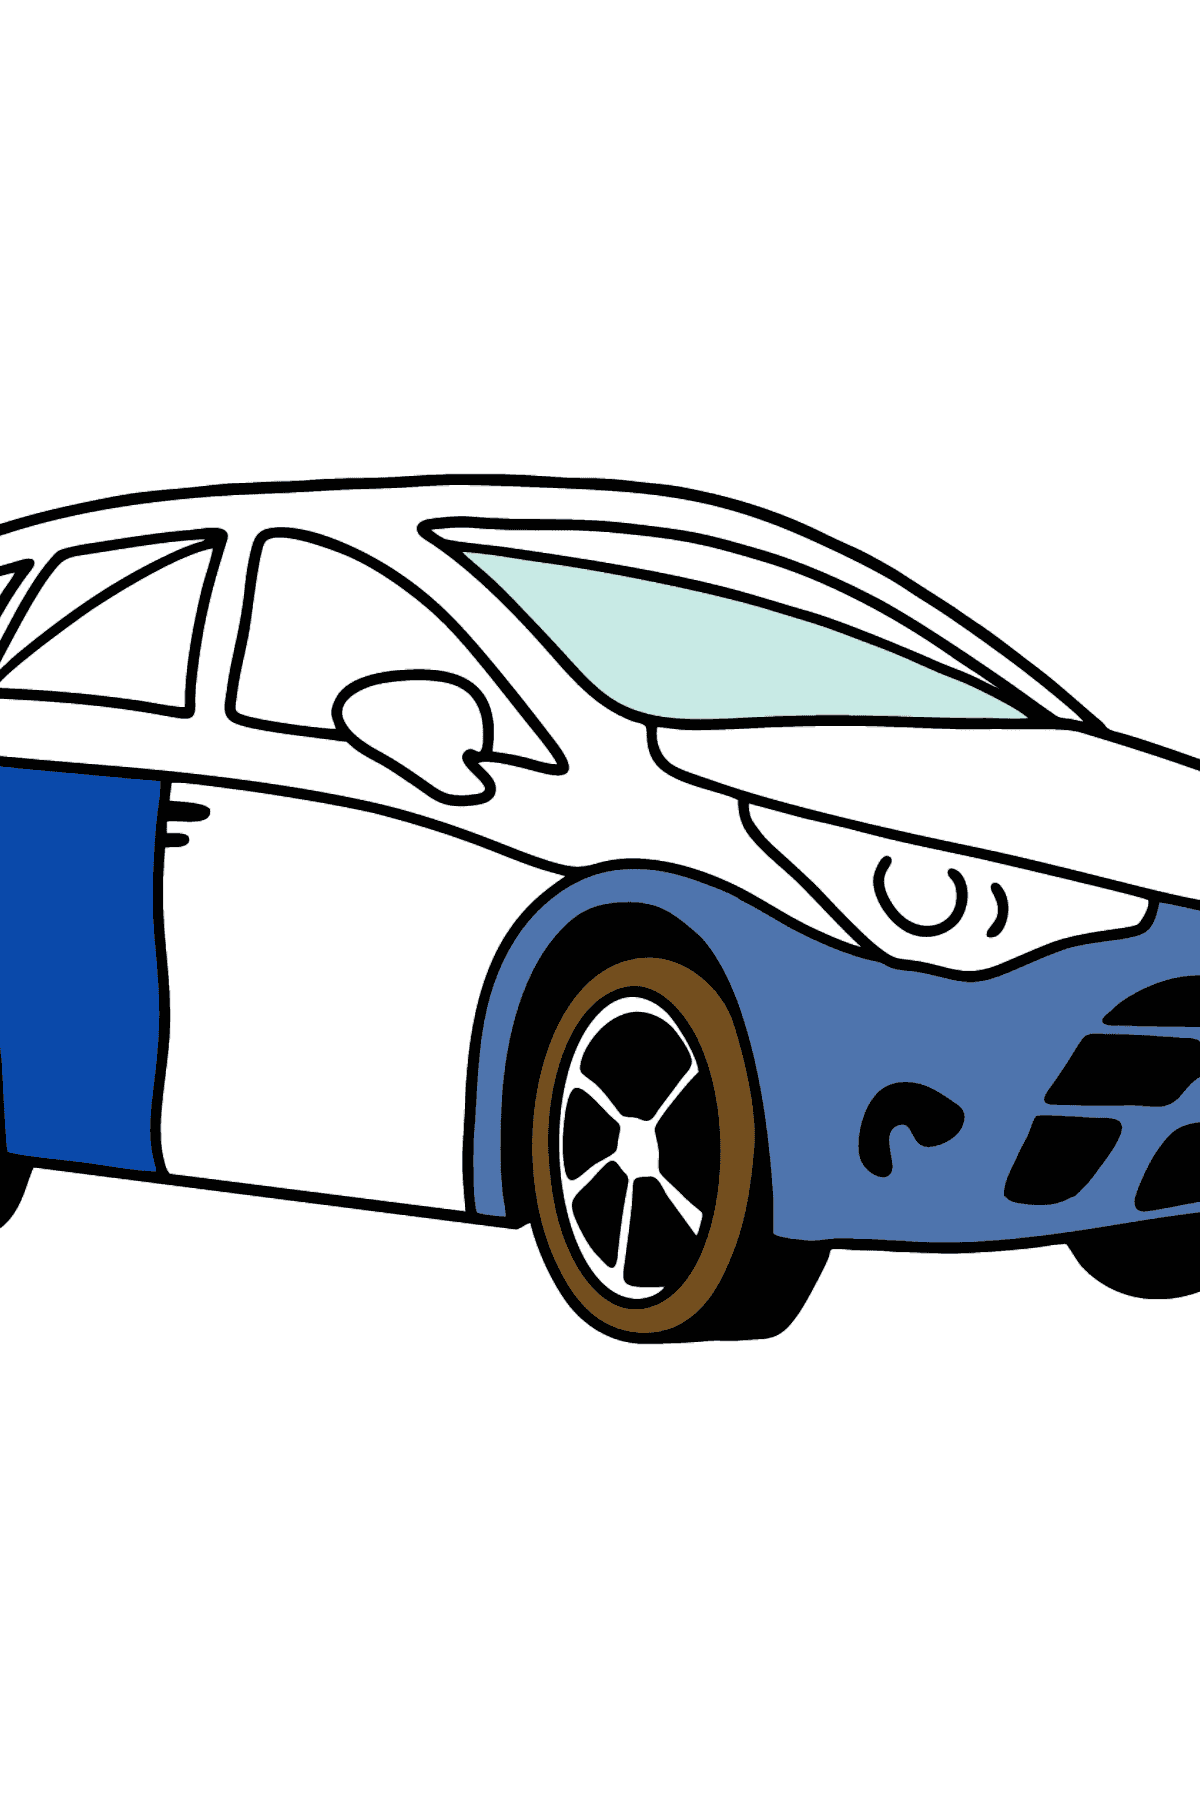 Toyota Avensis Car coloring page - Coloring Pages for Kids